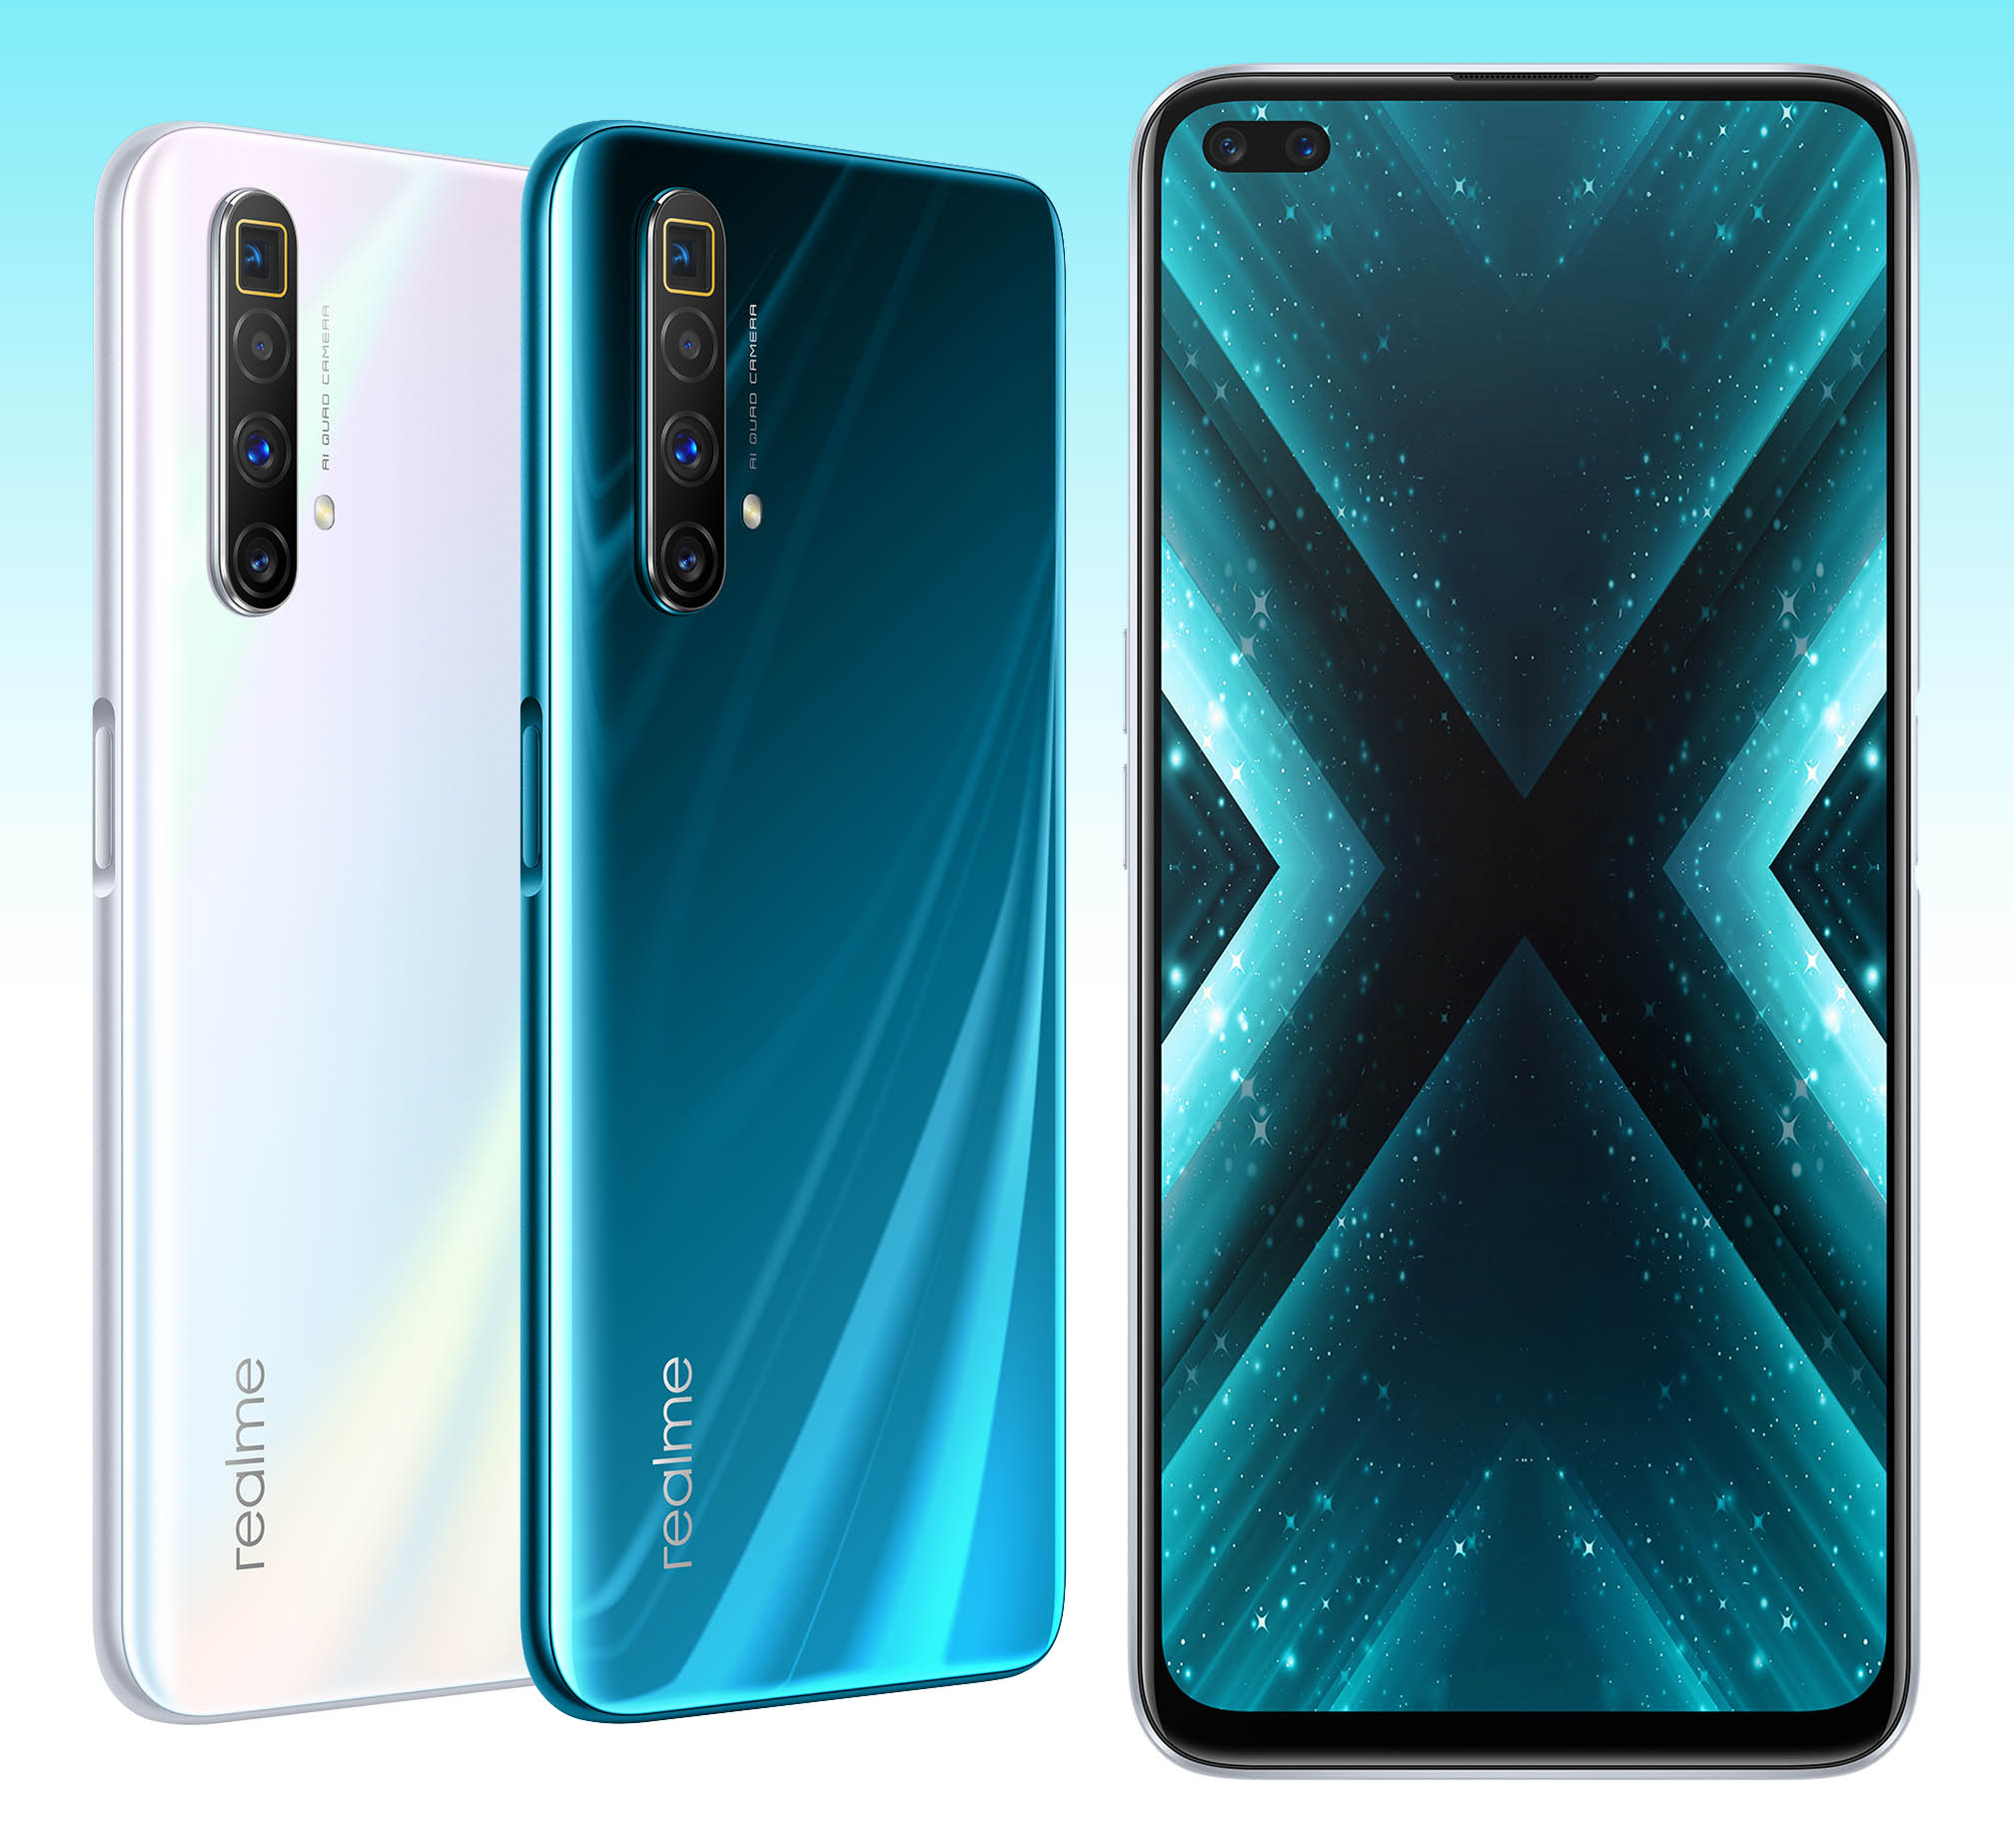 realme X3 SuperZoom offers superb camera capability, performance and display for only Php24,990